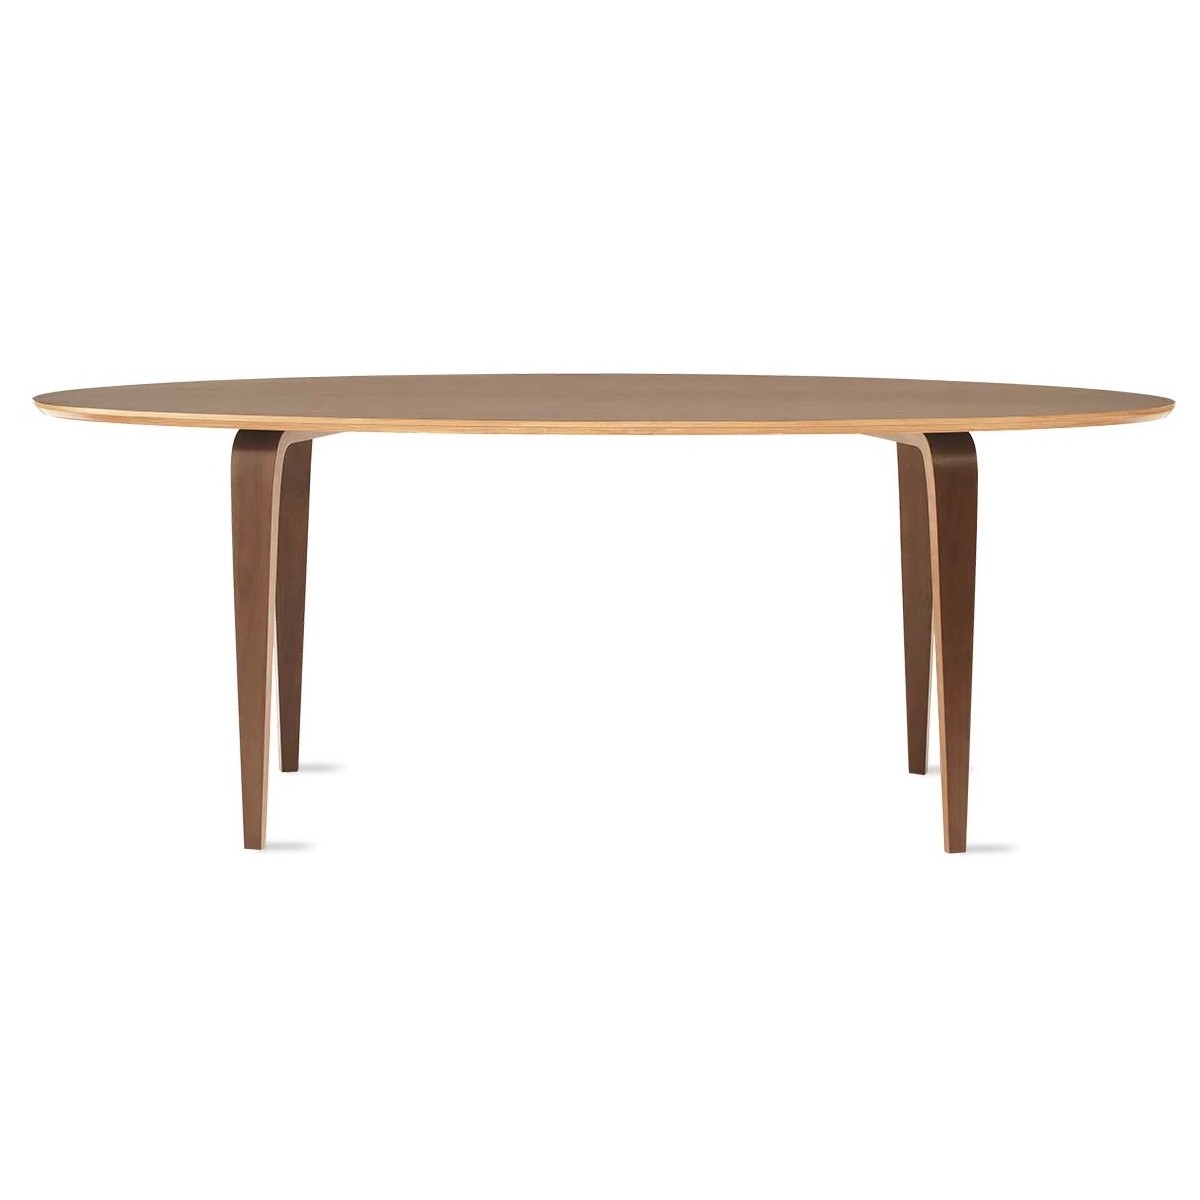 233,7 x 101,6 cm – Oval table – Natural walnut